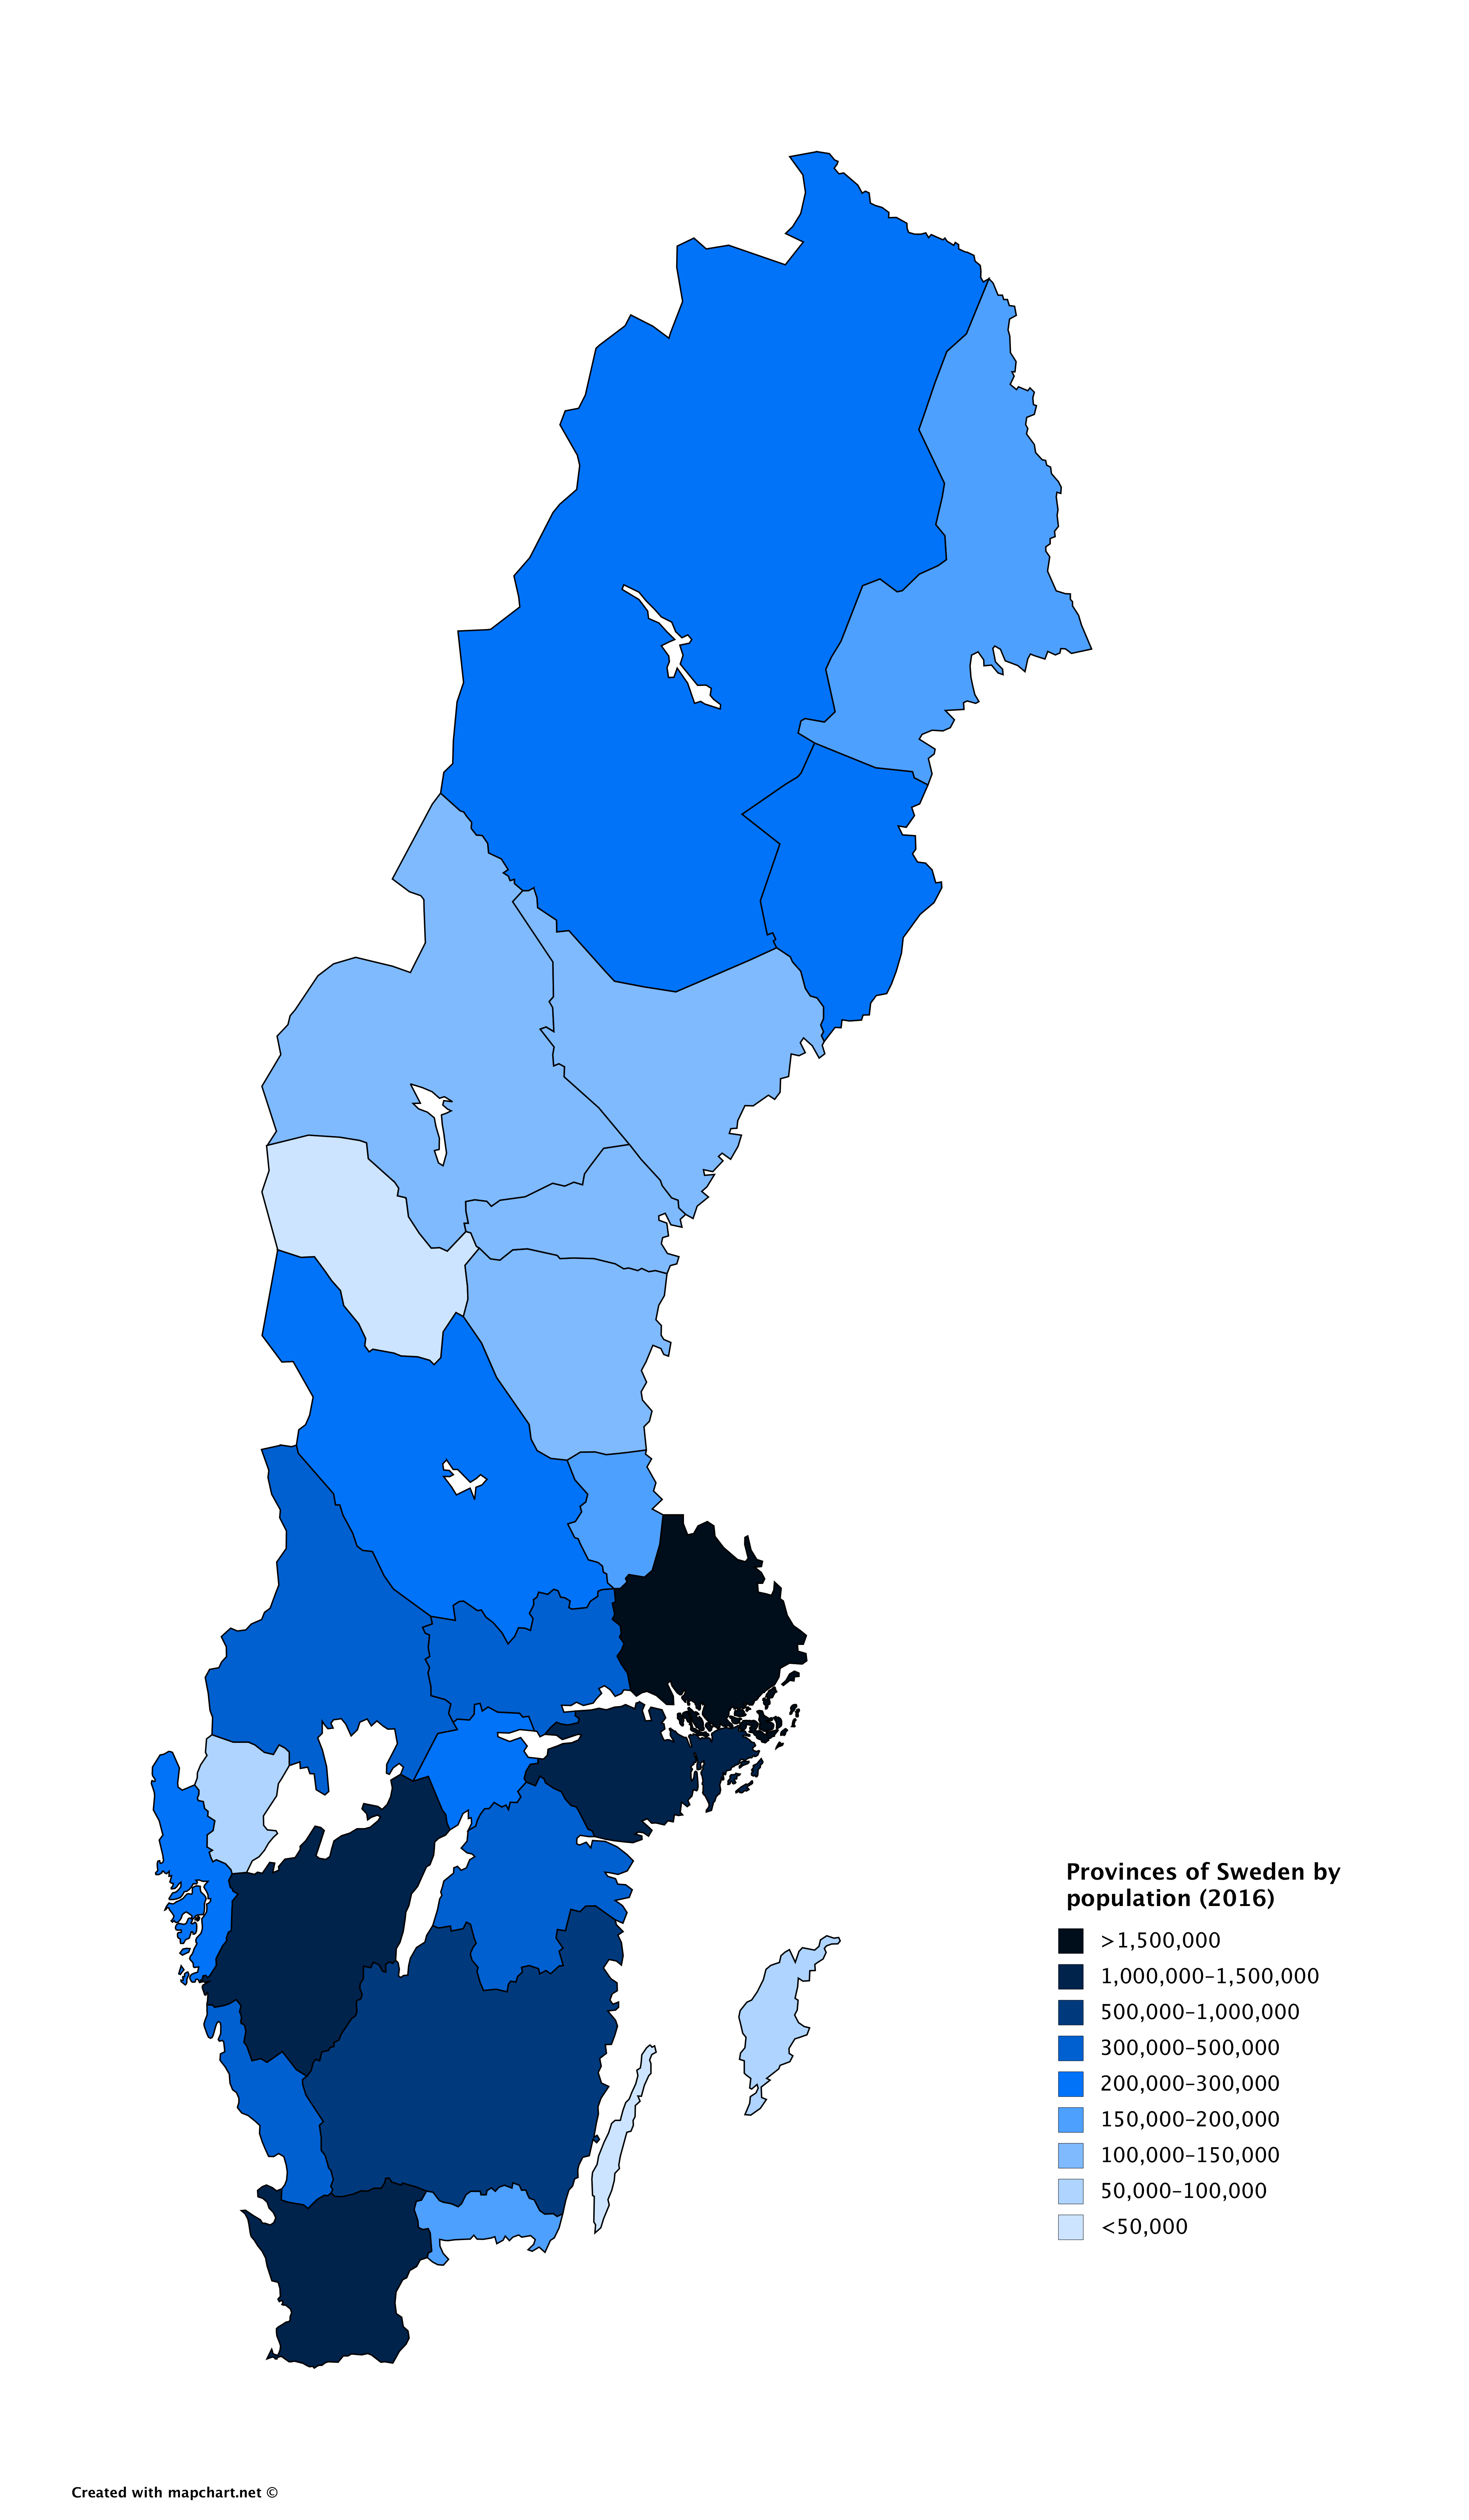 Provinces of Sweden - Wikipedia